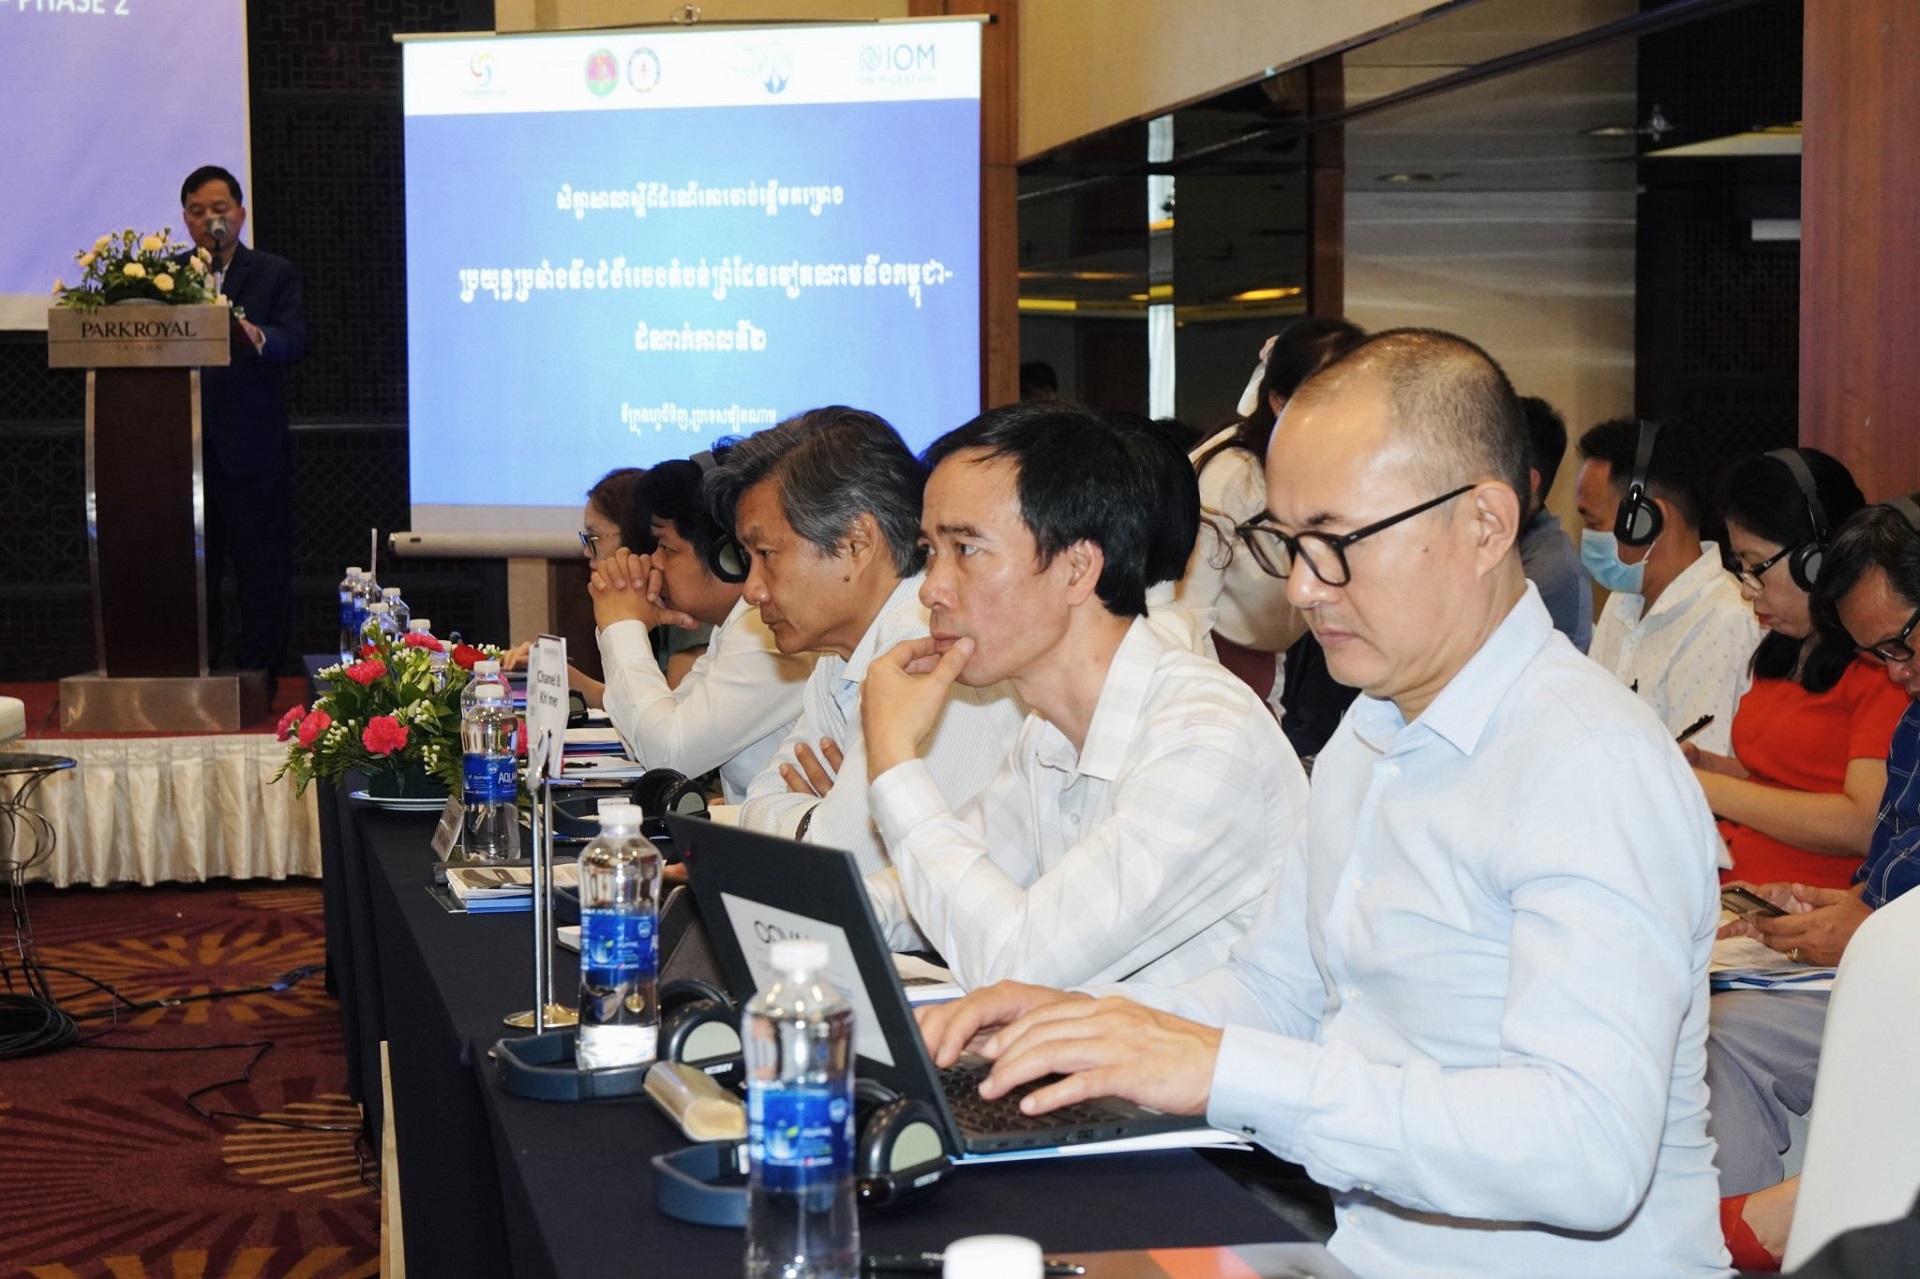 The project aims to strengthen cross-border partnership and collaboration between health authorities in four provinces of Viet Nam and Cambodia